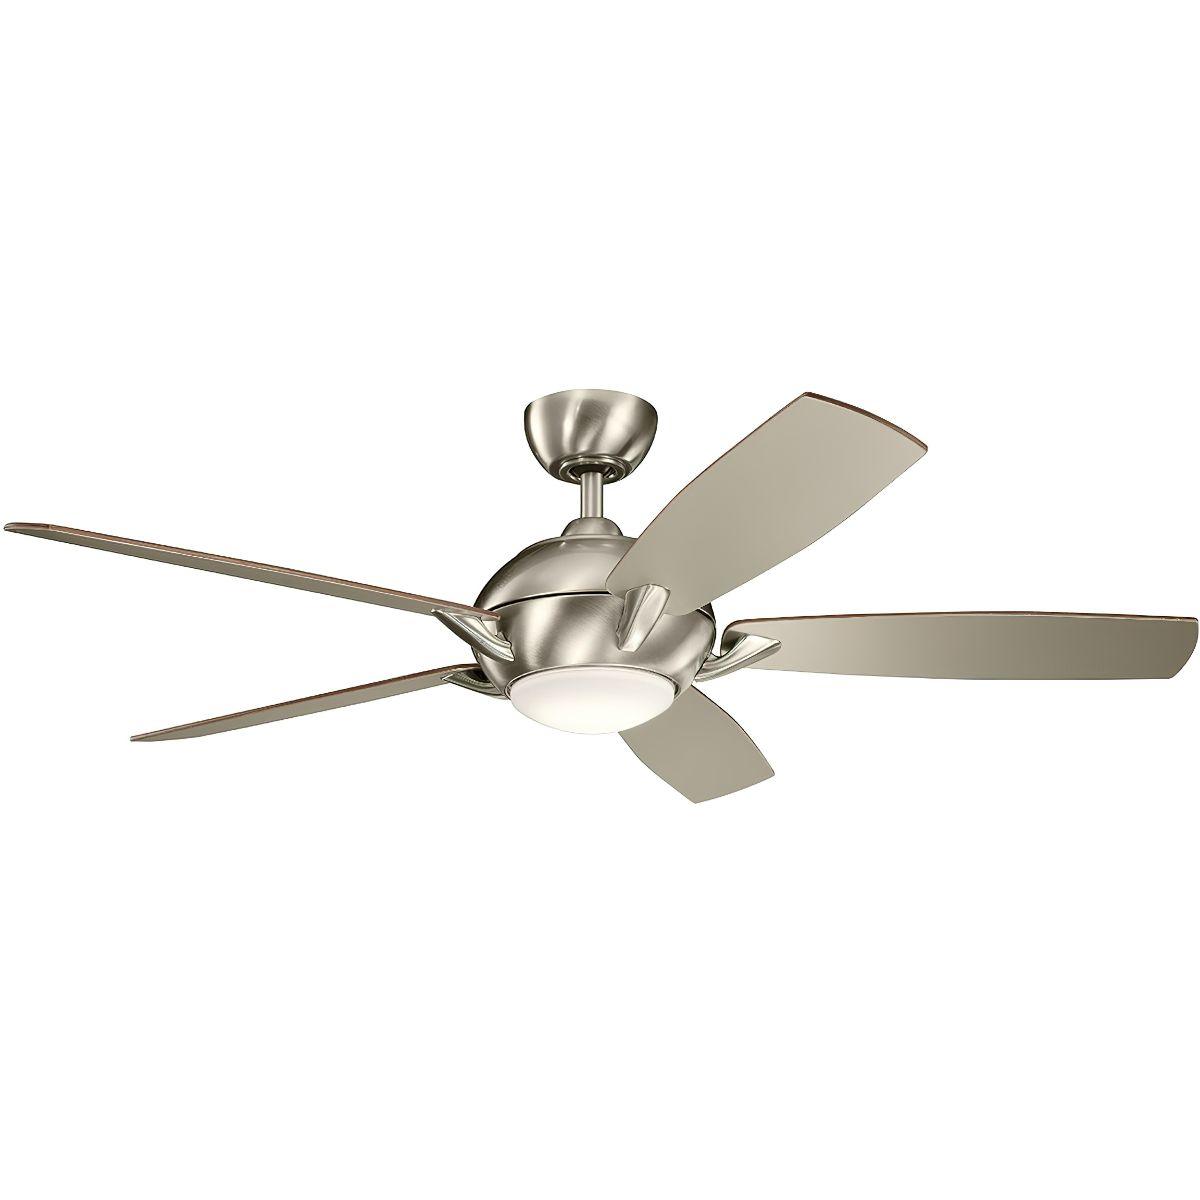 Geno 54 Inch Traditional Ceiling Fan With Light And Remote - Bees Lighting